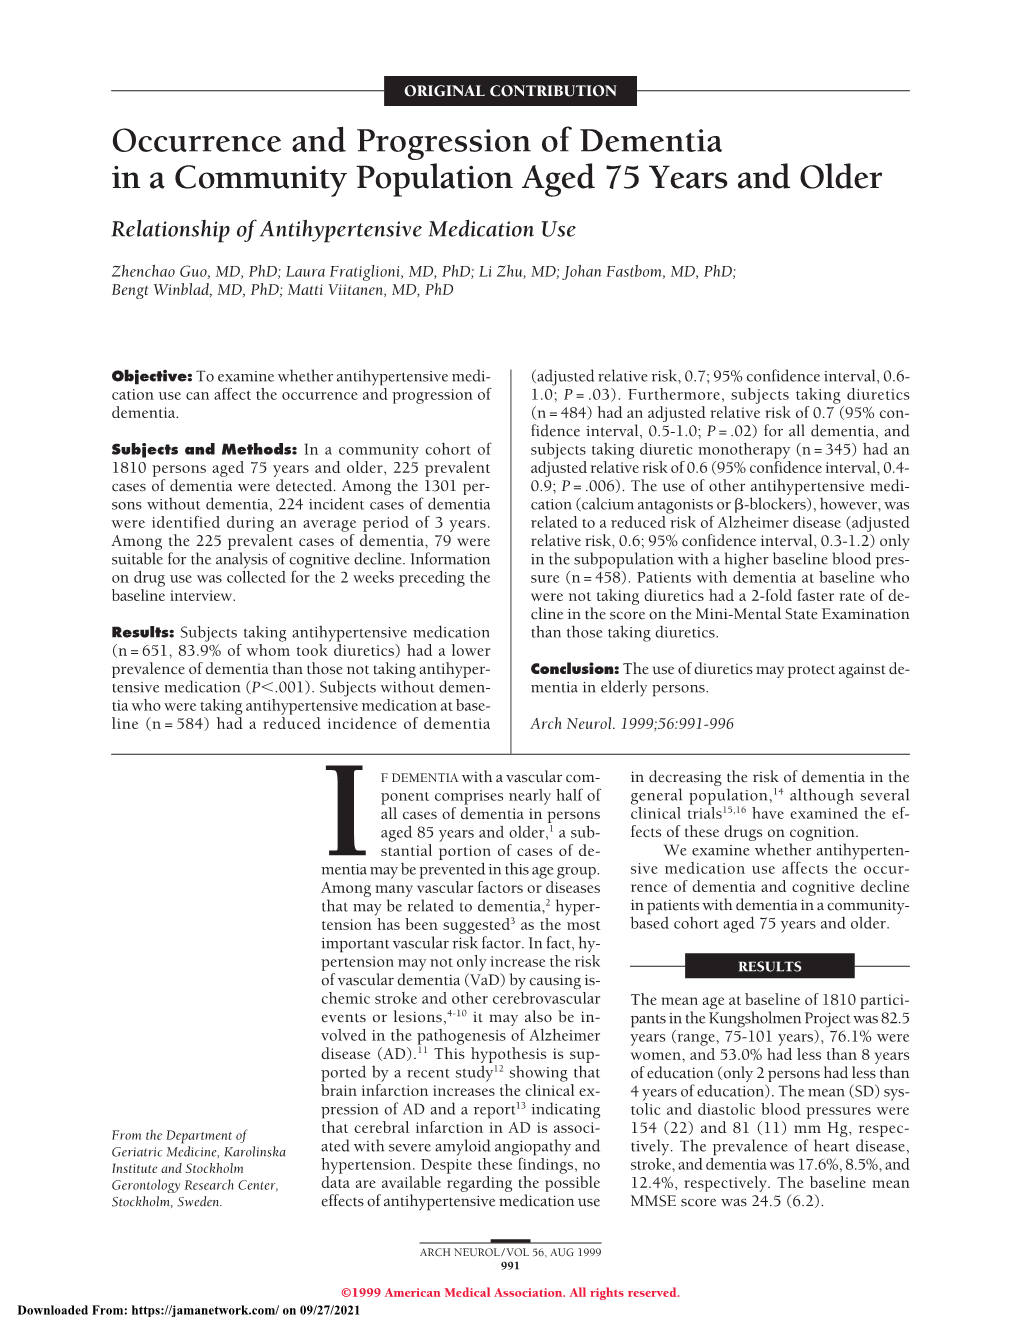 Occurrence and Progression of Dementia in a Community Population Aged 75 Years and Older: Relationship of Antihypertensive Medic